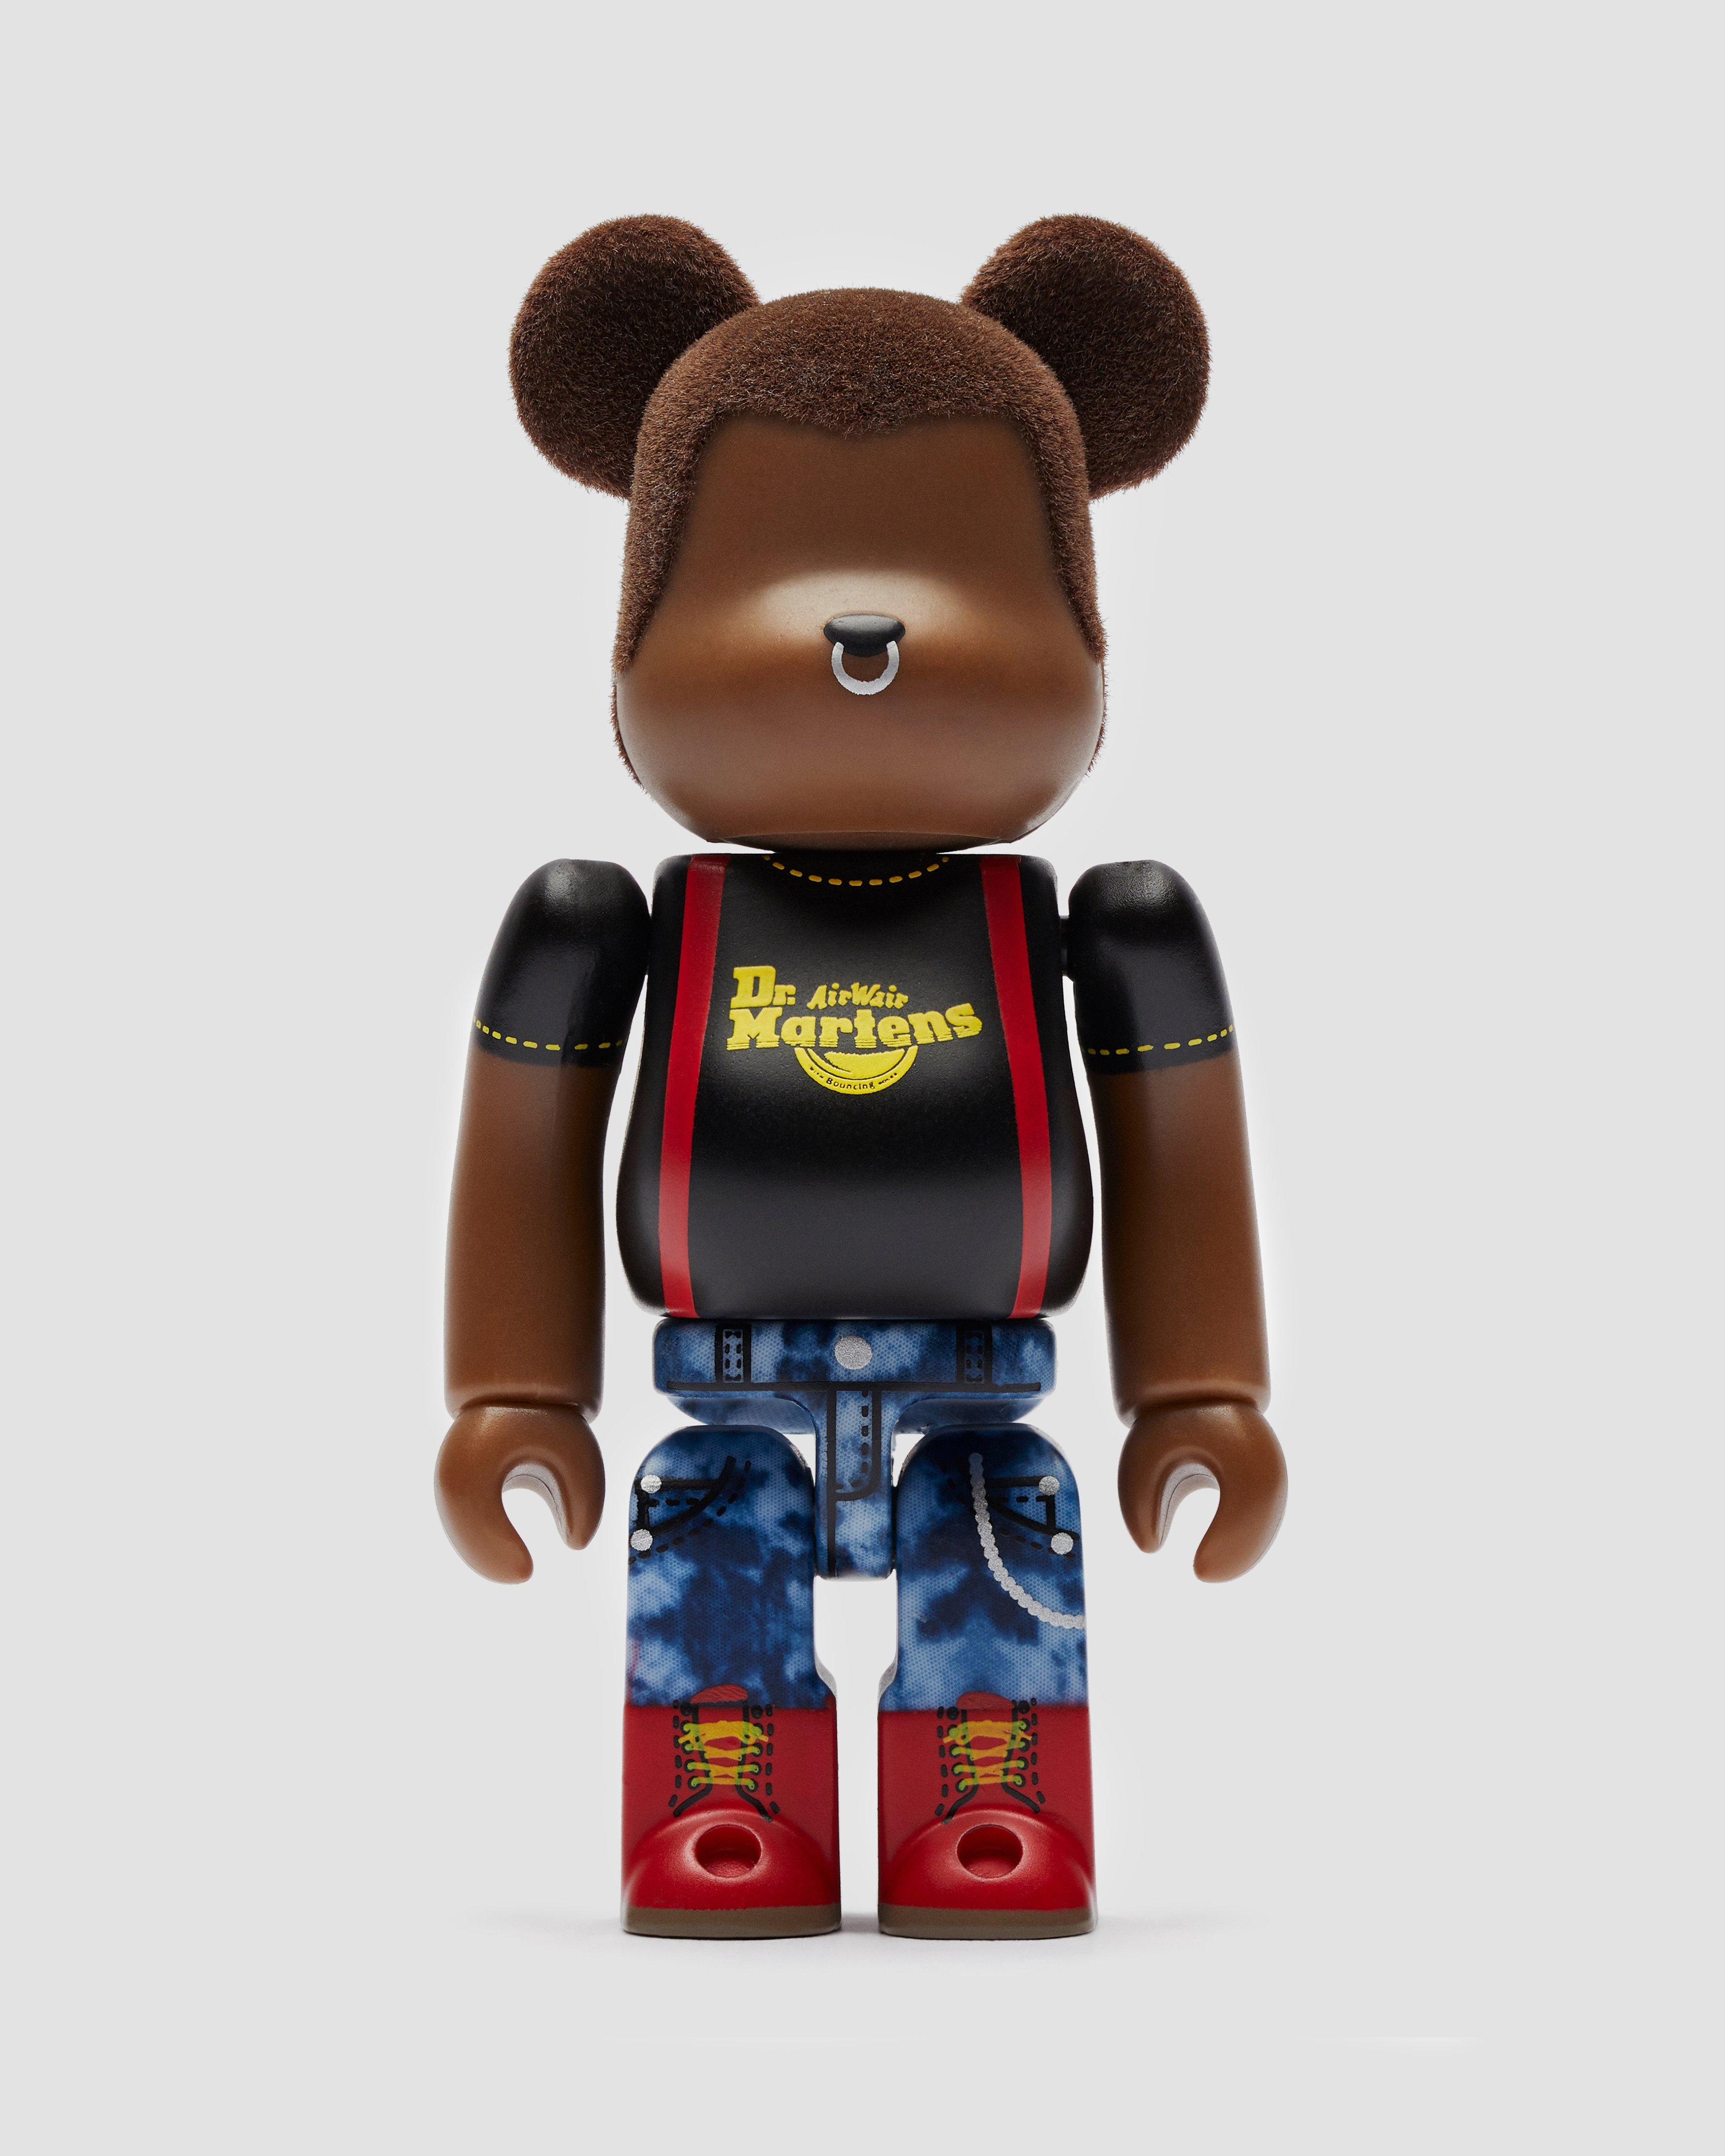 ACTION FIGURE BE@RBRICK ANNI '60ACTION FIGURE BE@RBRICK Dr. Martens